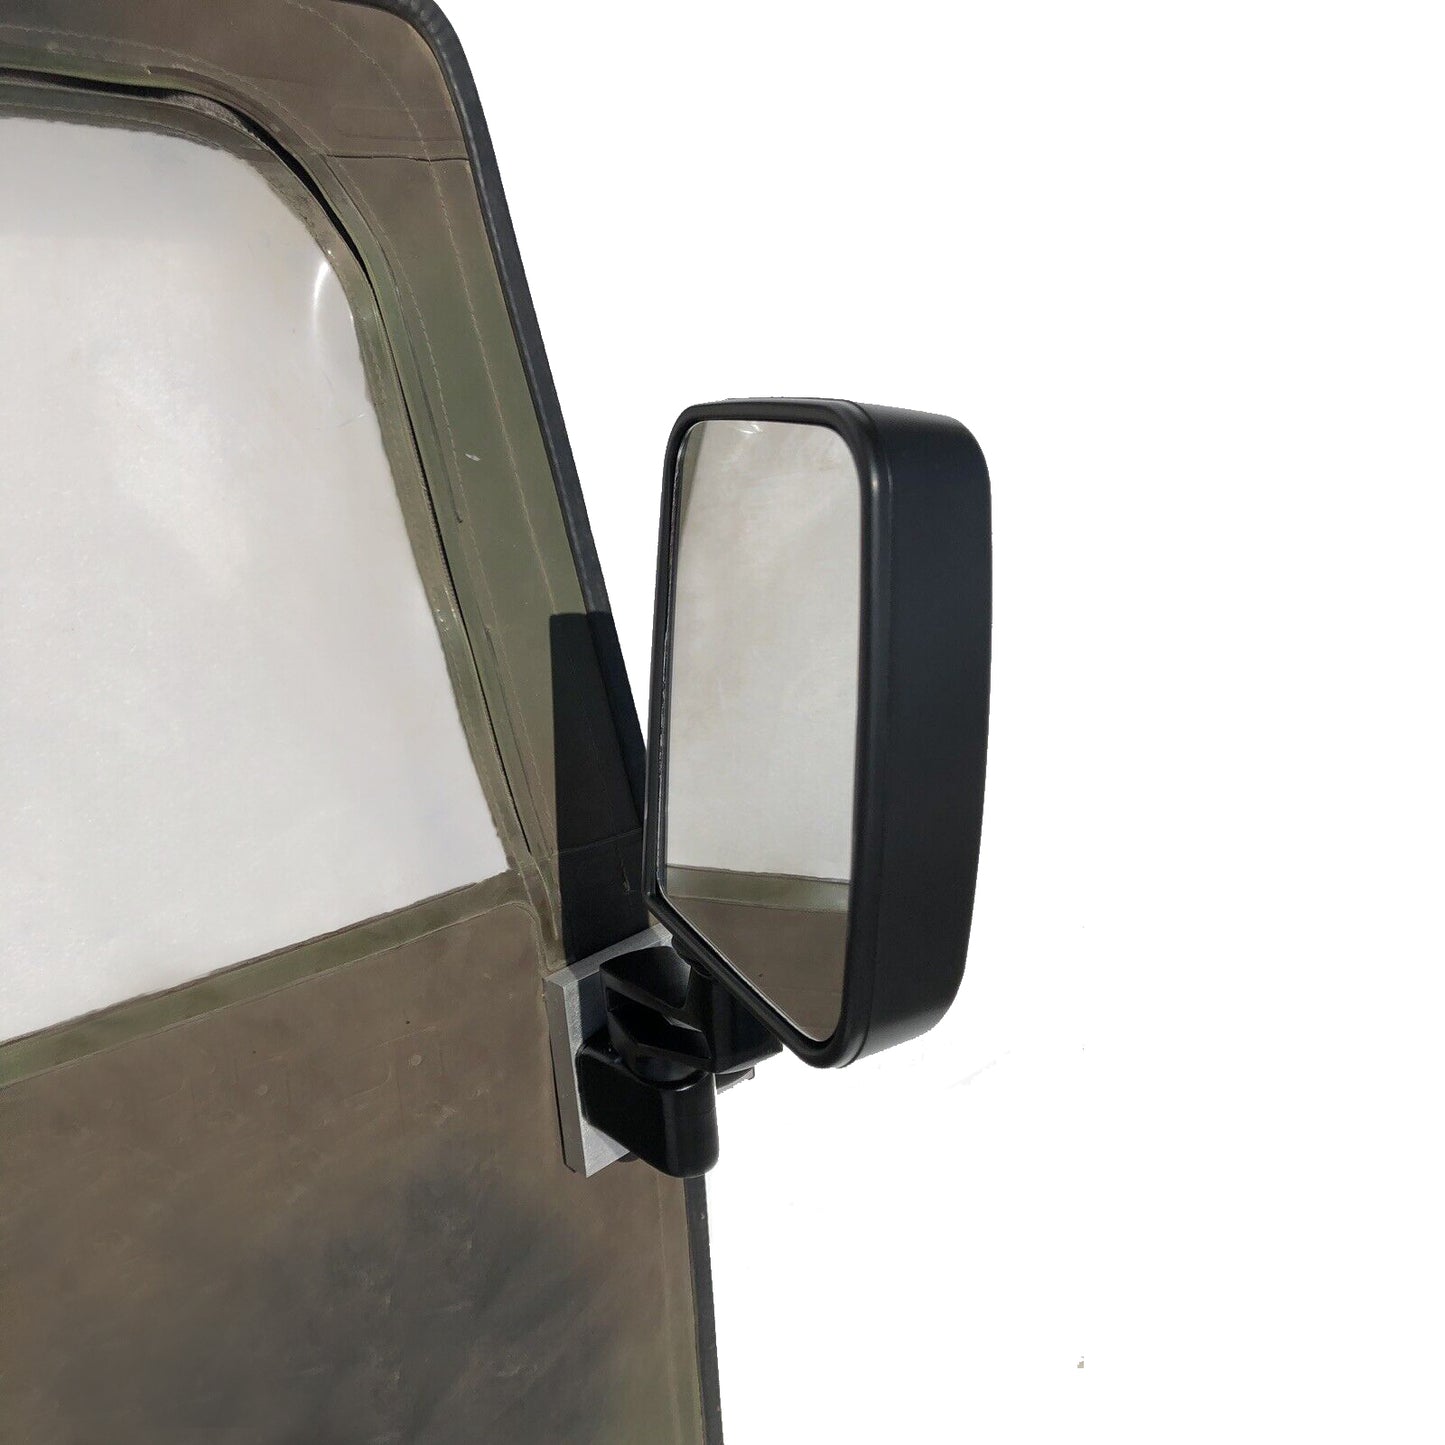 Adapter Plate Pair (No Mirrors) For Mounting 2 Mirrors On Canvas Soft Doors